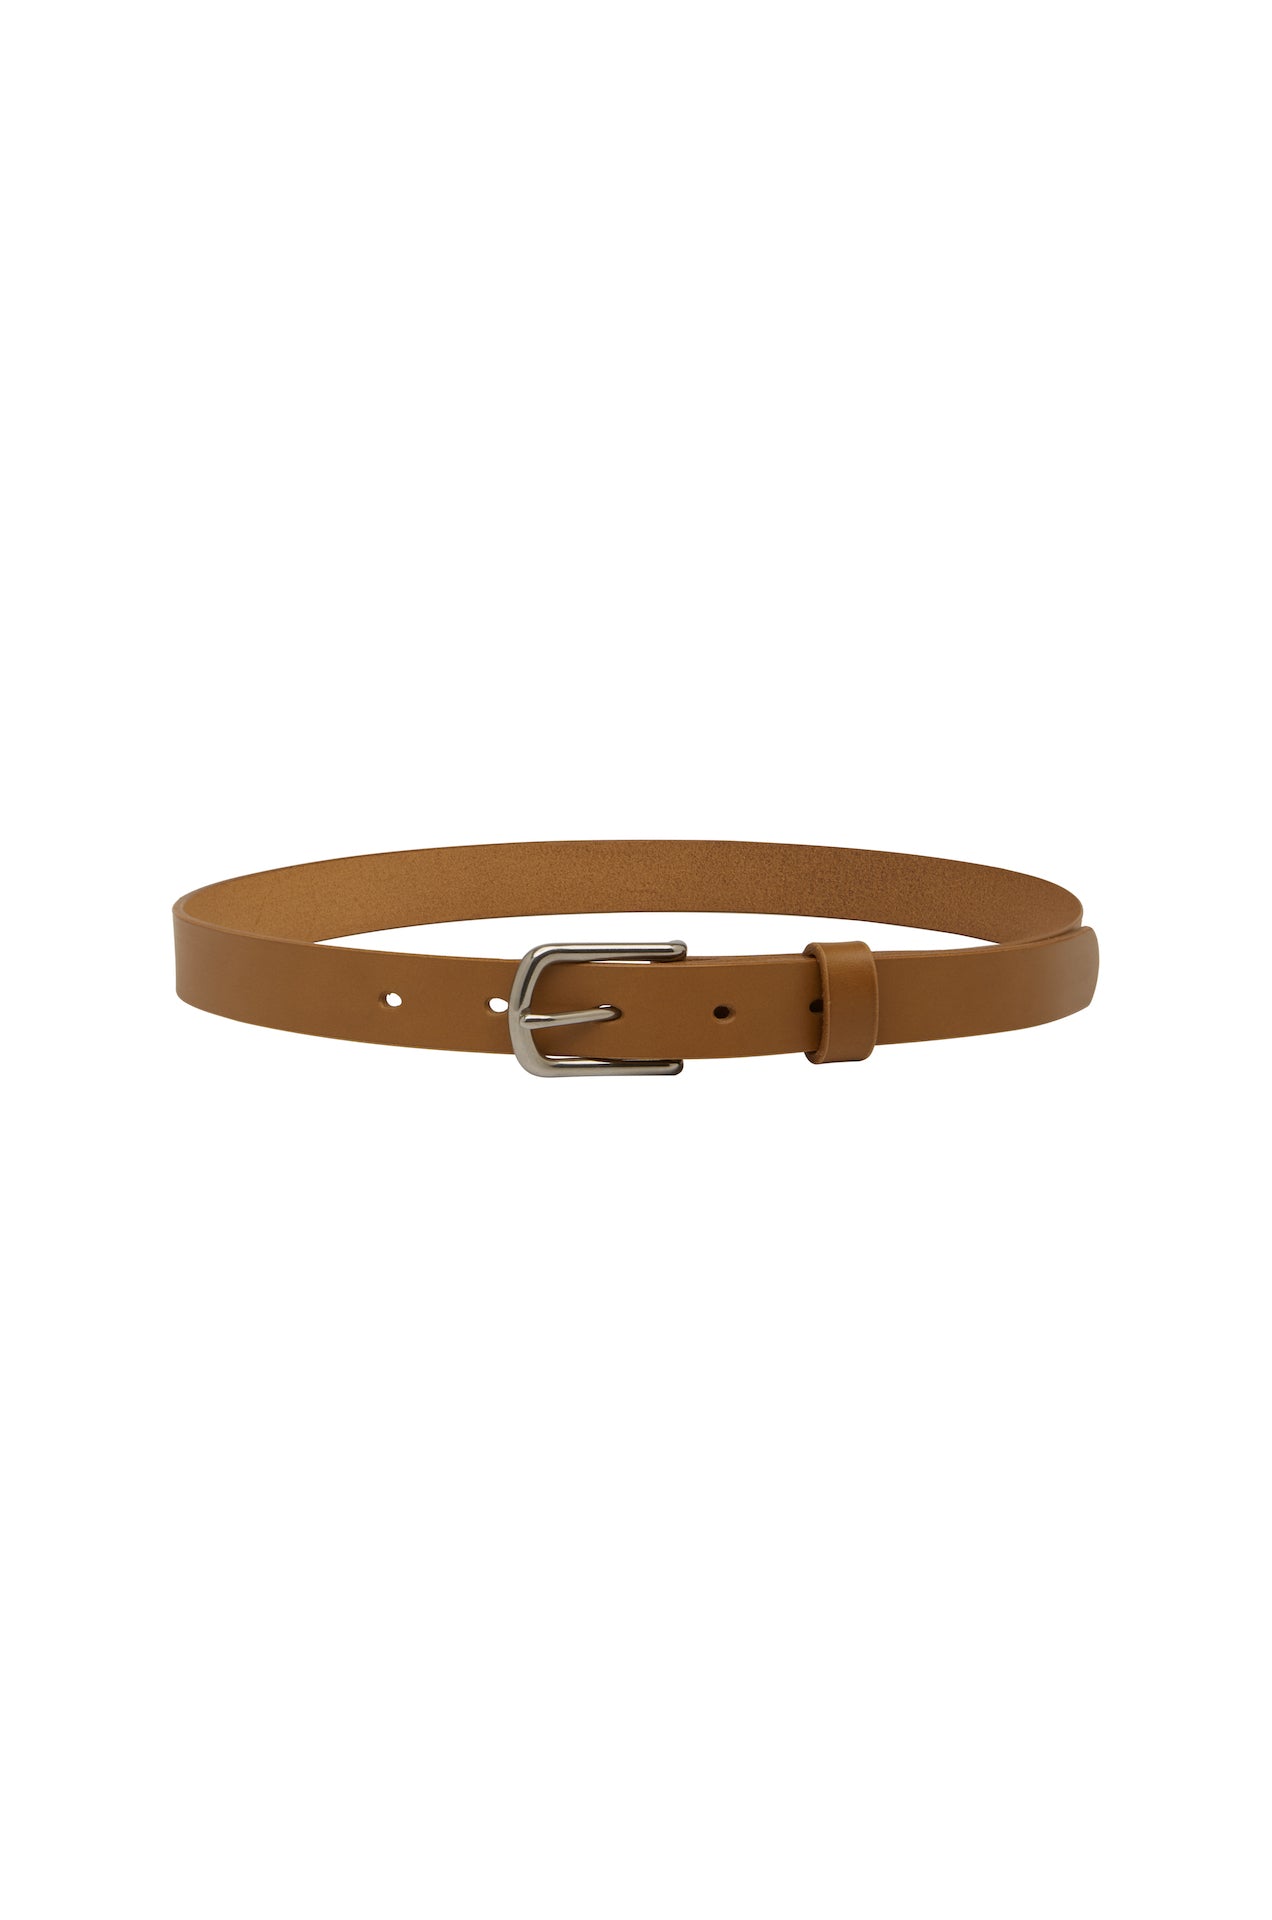 SAINT classic leather belt in tan leather with silver stainless steel buckle. made in Australia using traditional leather smith techniques. 100% Italian leather